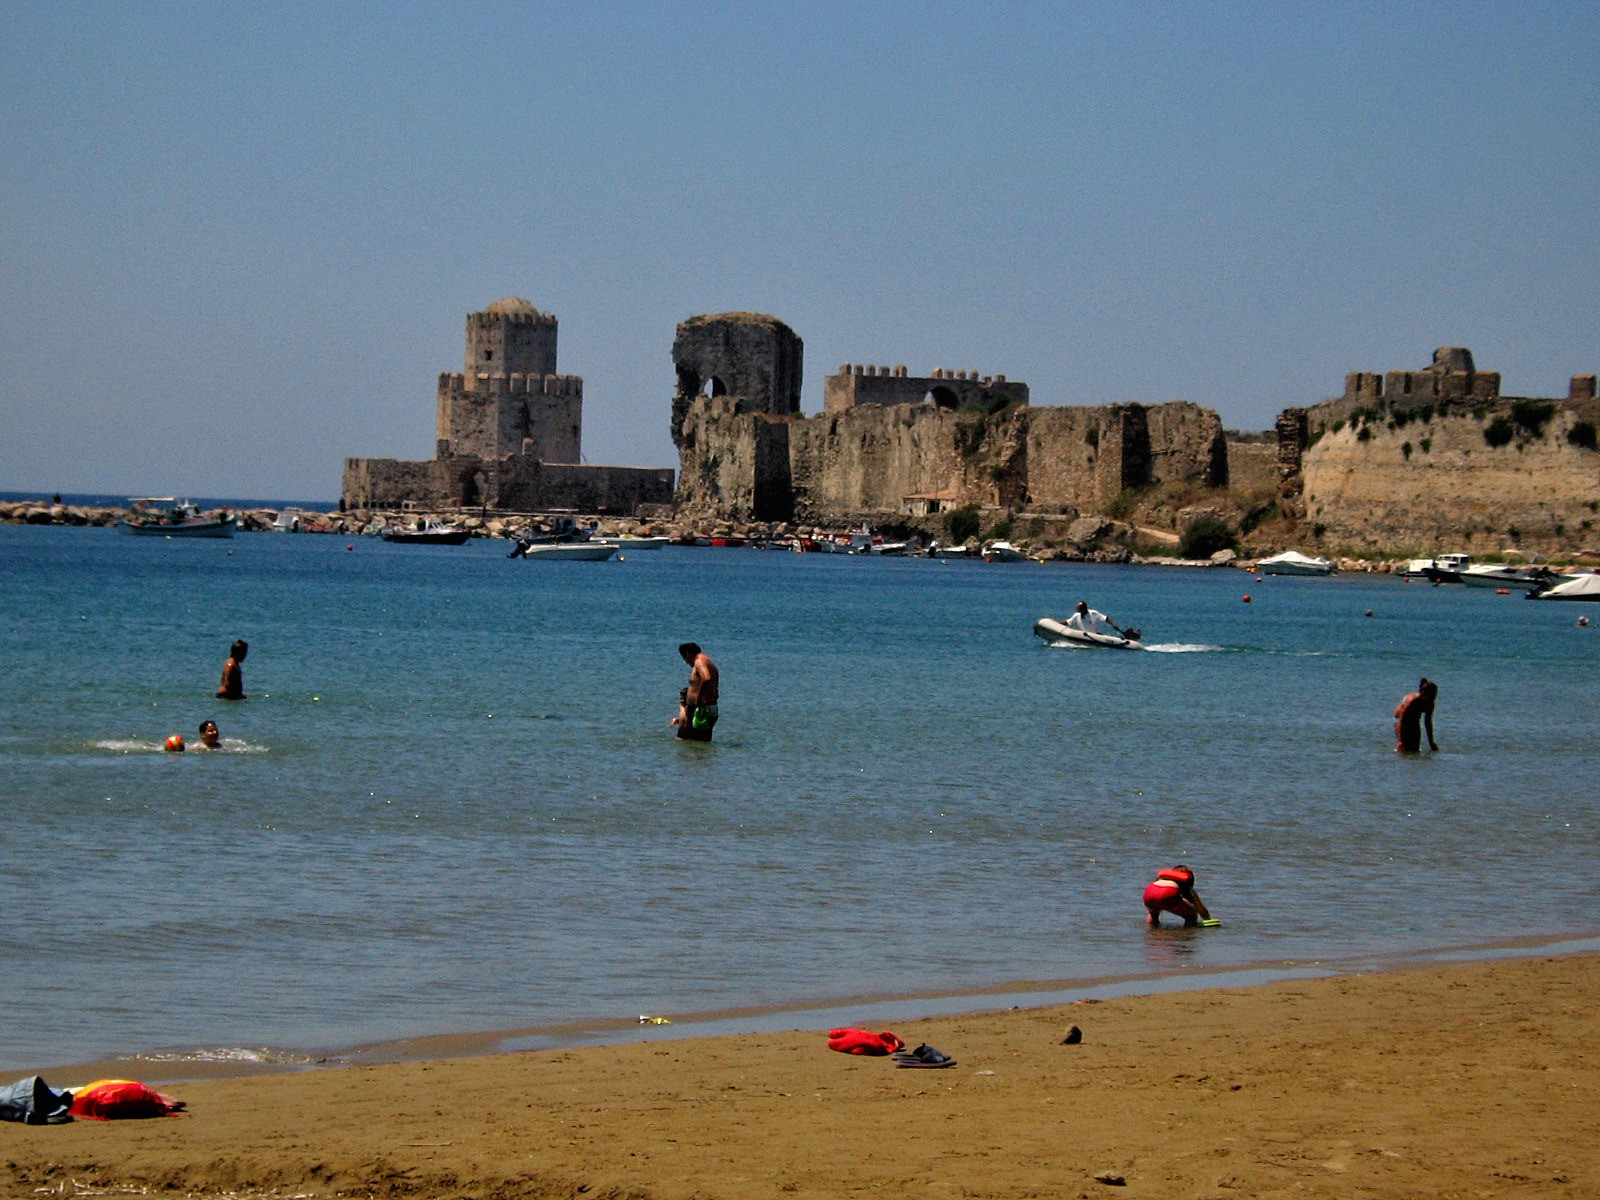 Methoni beach, around 10 km faraway from Pylos, and magnificent Bourtzi tower behind the beach which built the Turks in the 16th Century - Methoni Greece 